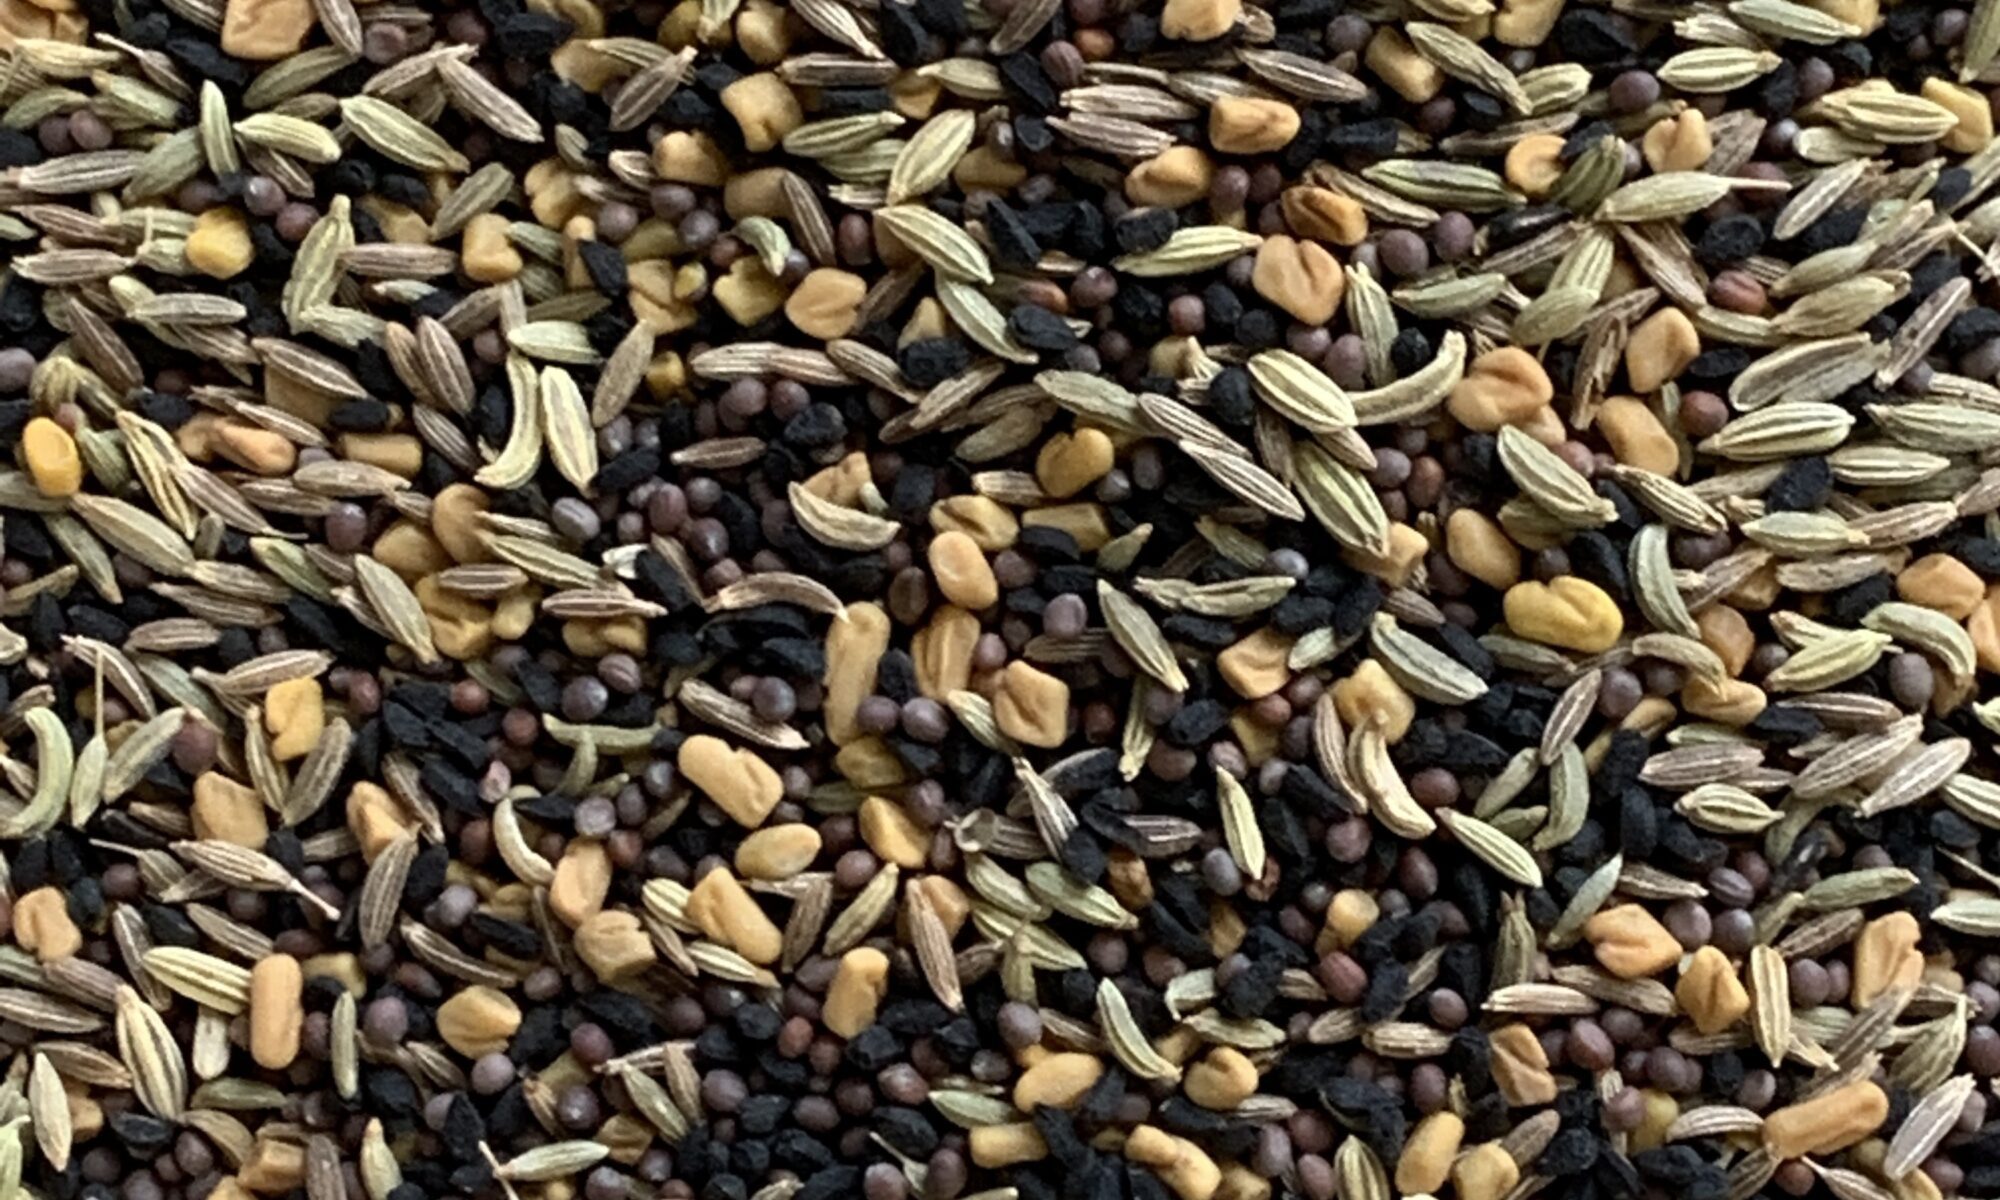 Image of the five seed blend that is Panch Phoron.